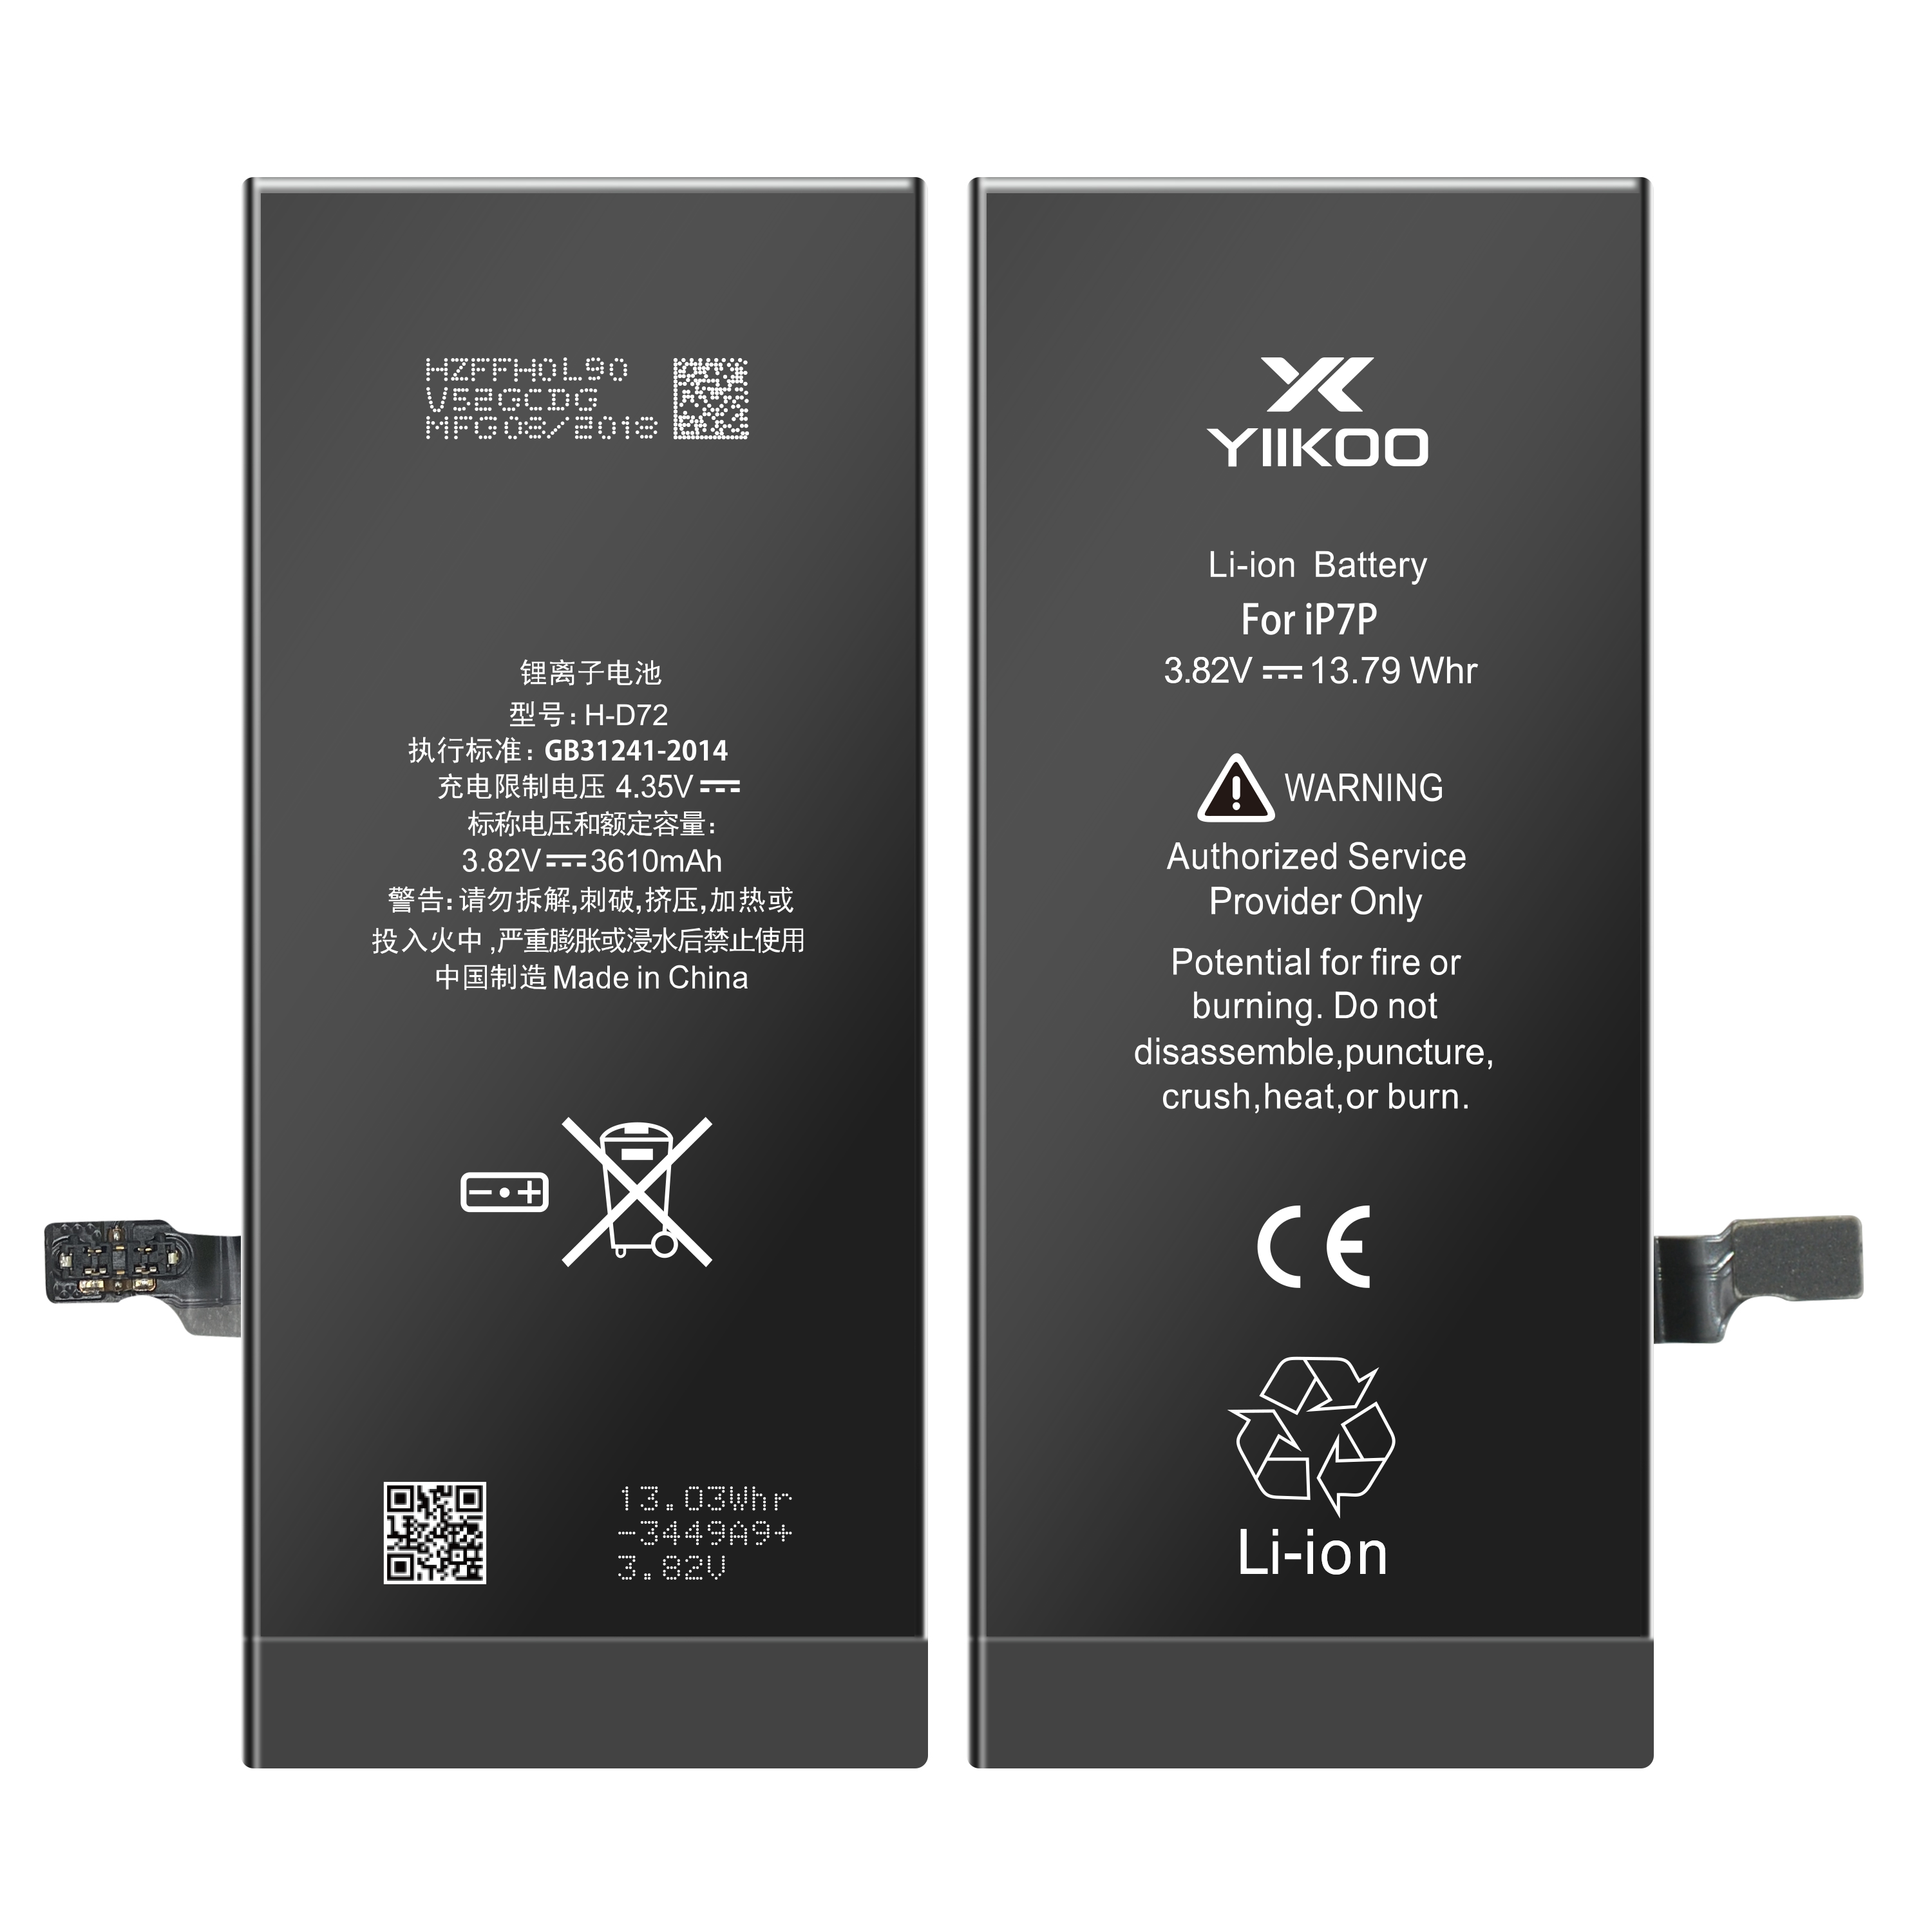 Msds 3380mah Portable Phone Battery Original High Capacity Battery For Iphone 7P yiikoo Brand Featured Image